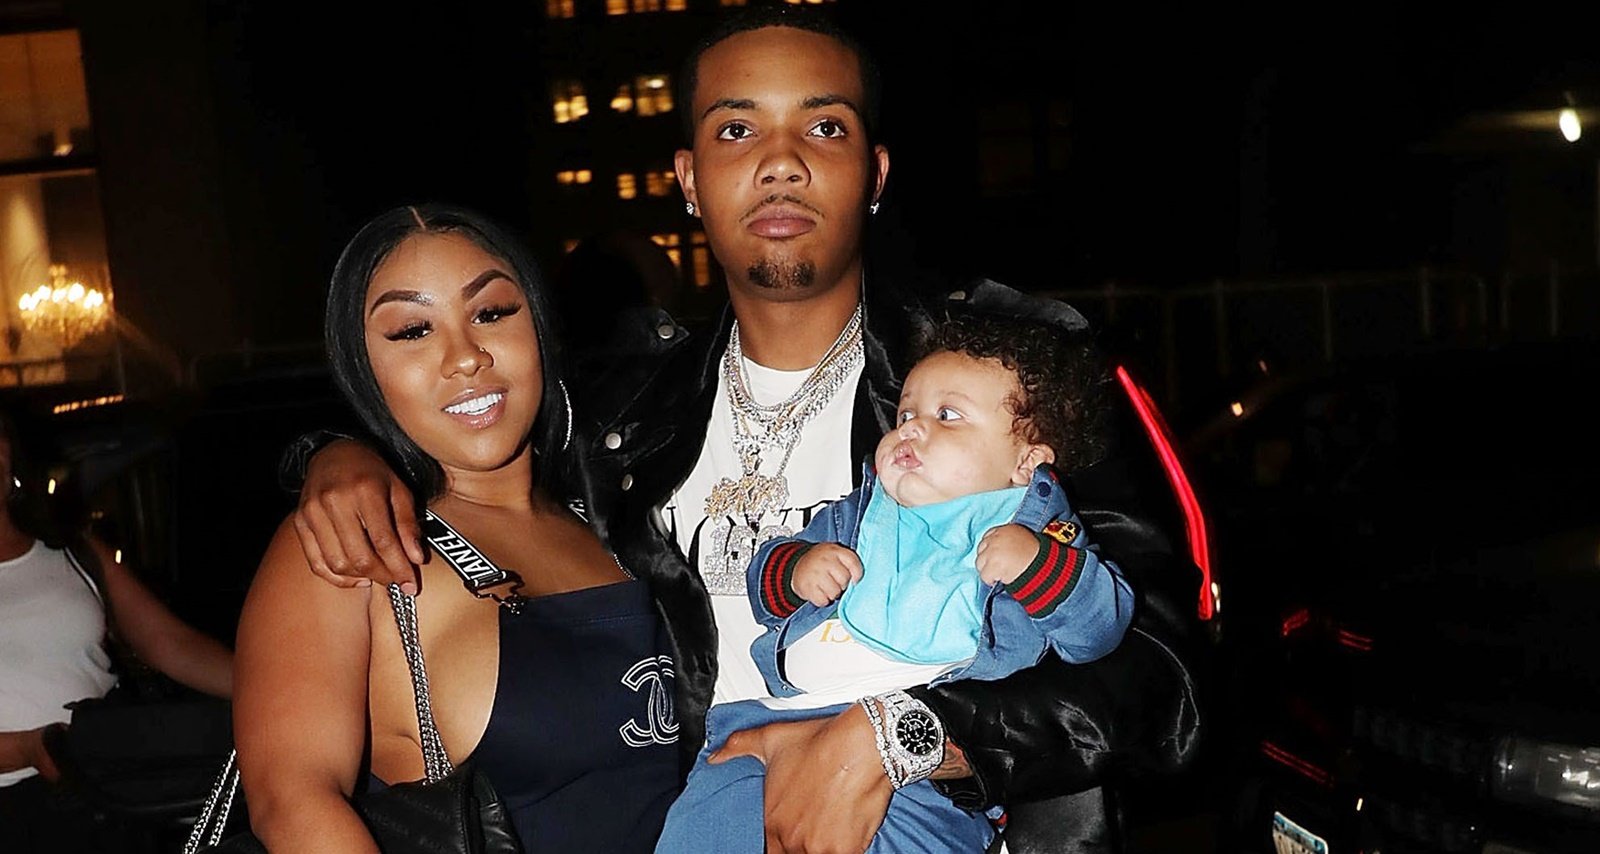 Ariana Fletcher Wiki, Age and Facts About G Herbo’s Ex-Girlfriend and Baby Mama